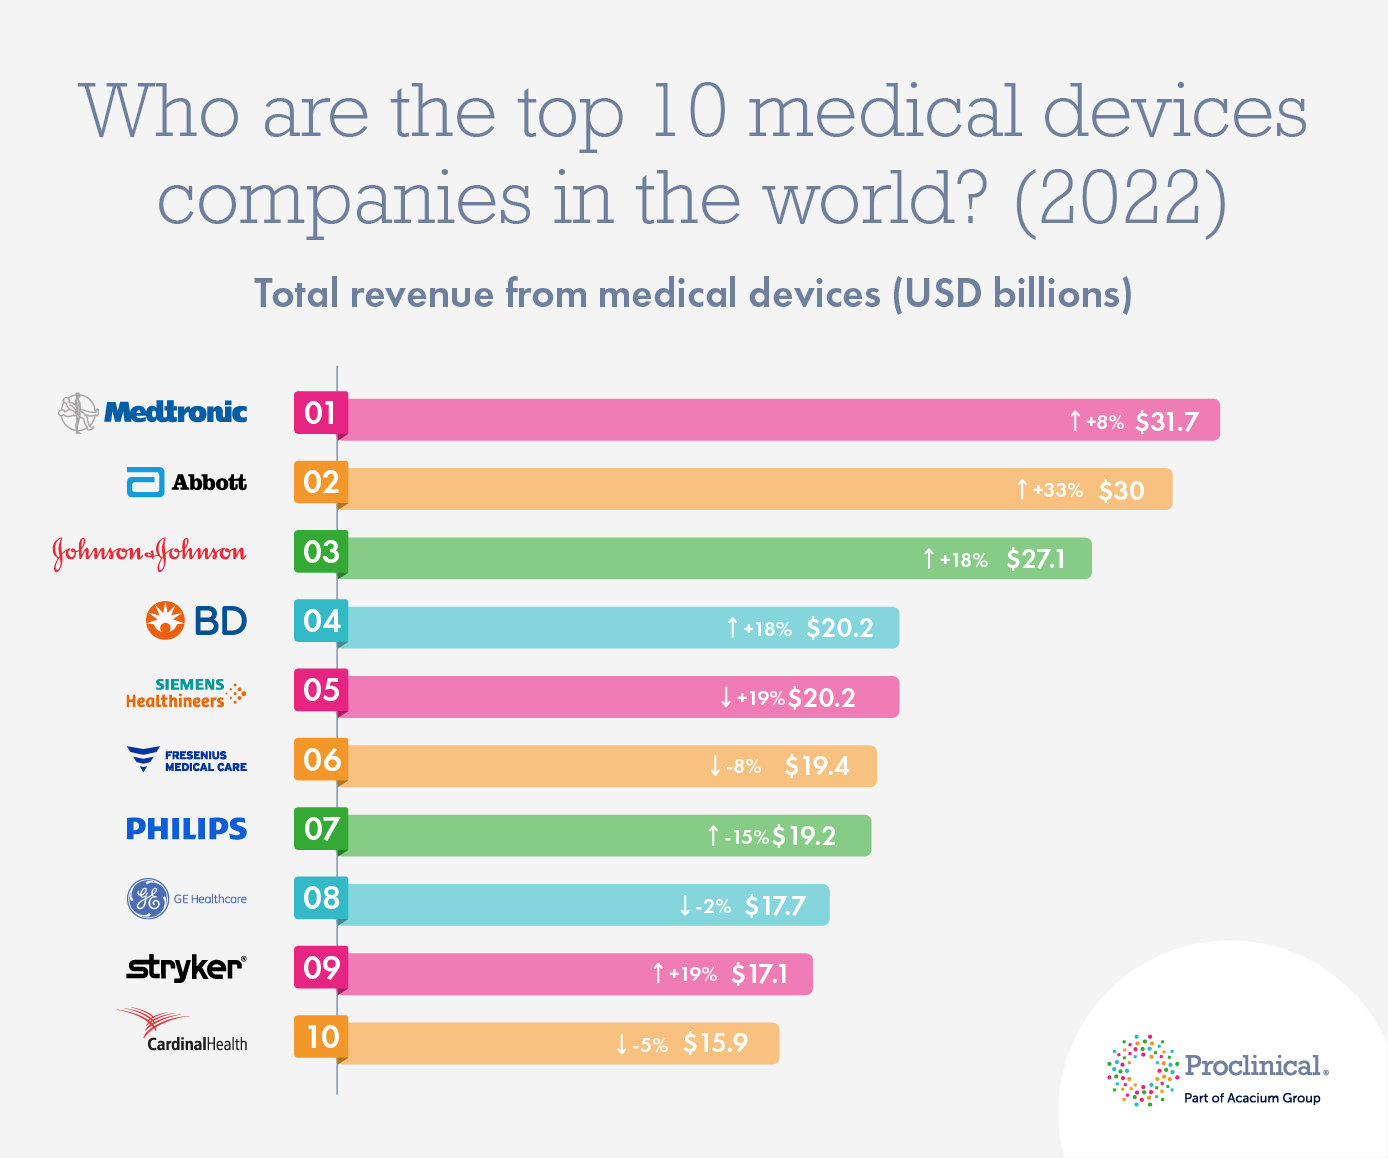 Who are the top 10 medical device companies in the world in 2022?